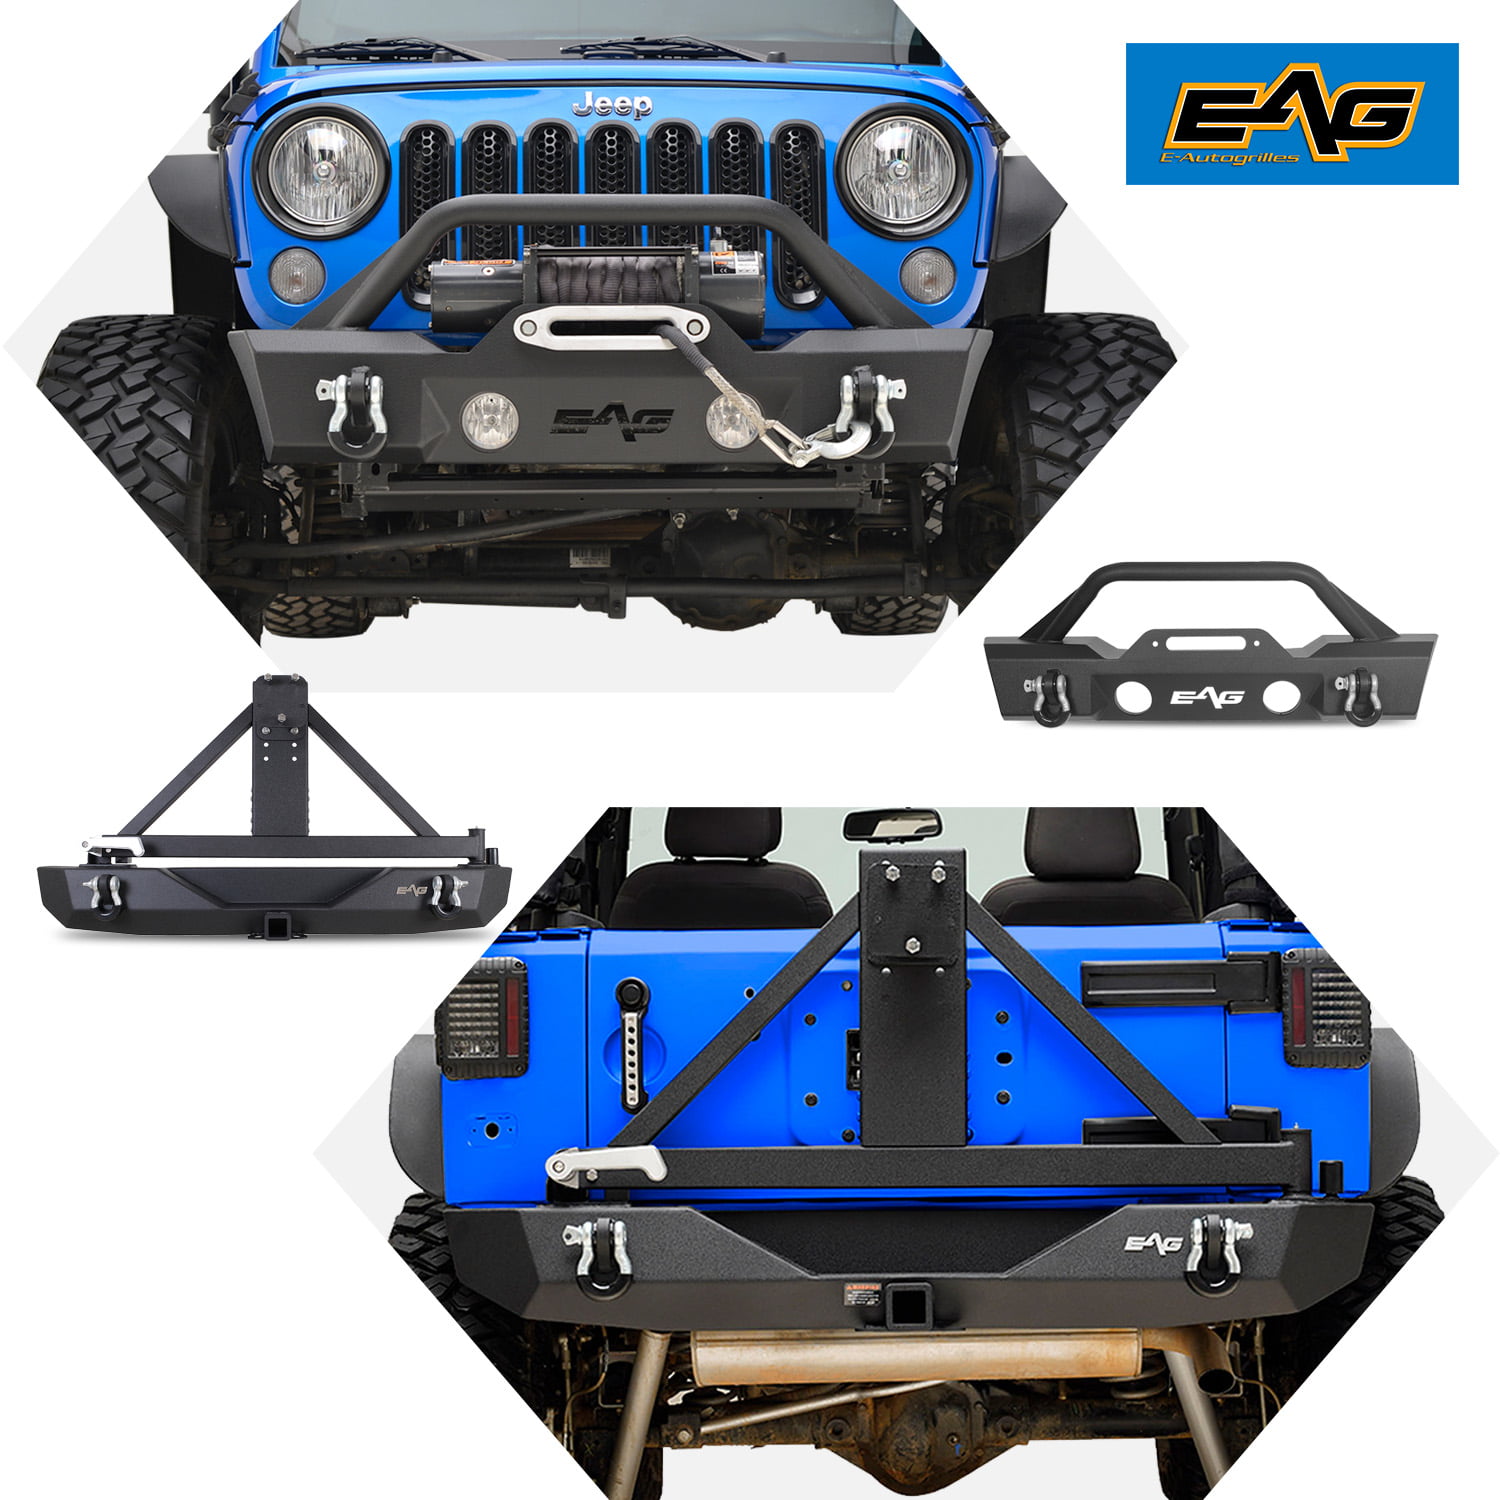 Different Trail Front Bumper w/Winch Plate & Rear Bumper w/Tire Carrier & Hitch Receiver for 07-18 Jeep Wrangler JK Jeep Wrangler JK Bumpers Front and Rear Combo